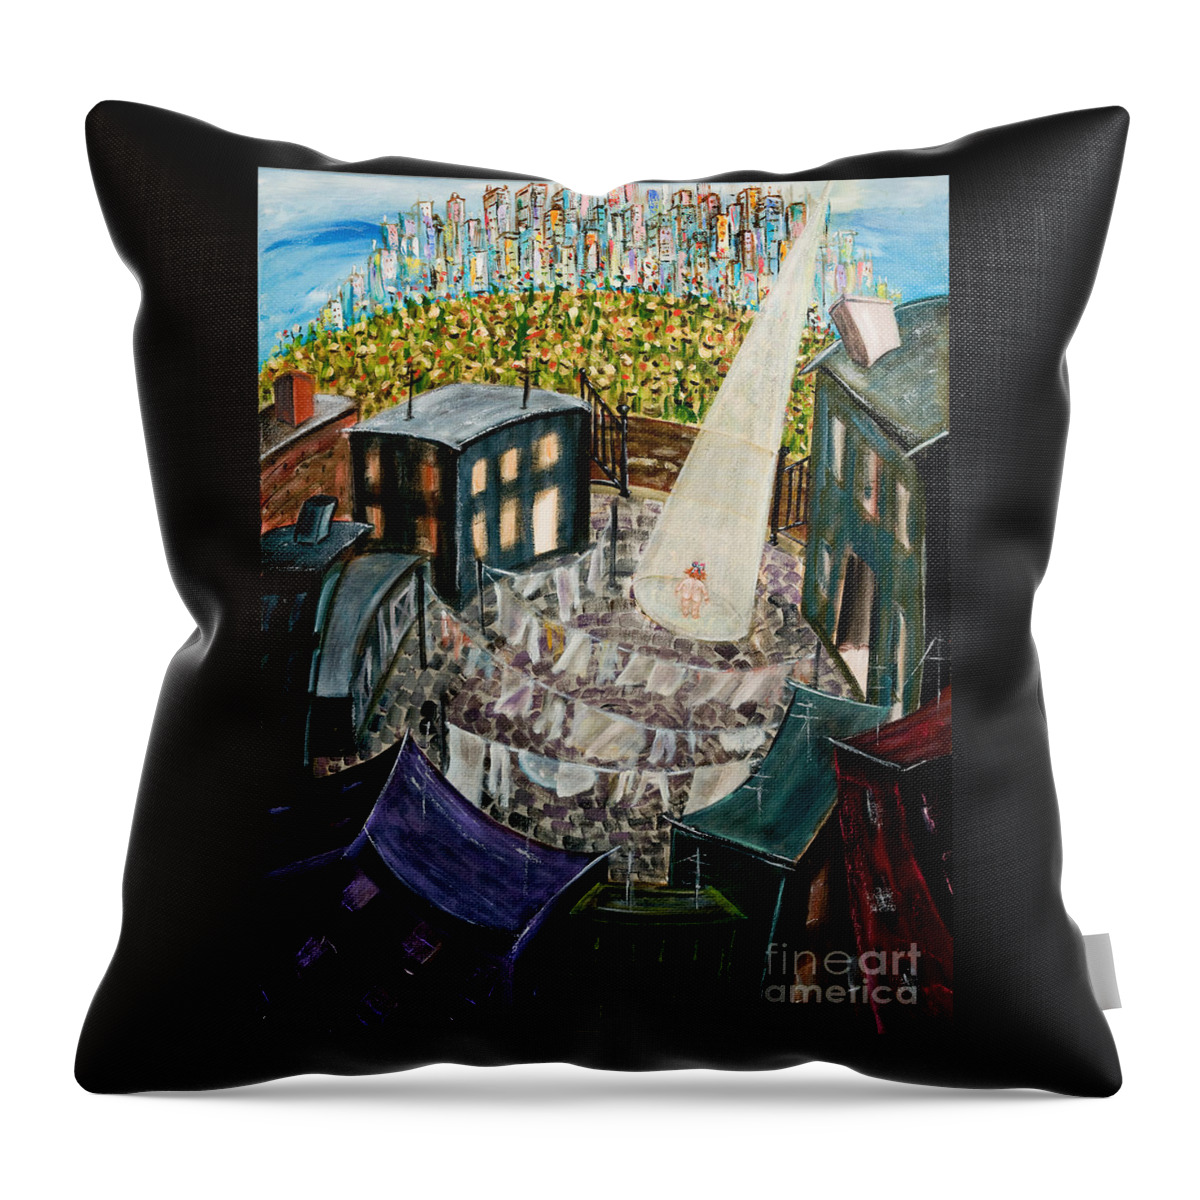 Story Telling Throw Pillow featuring the painting Bigger Than I by Olga Alexeeva